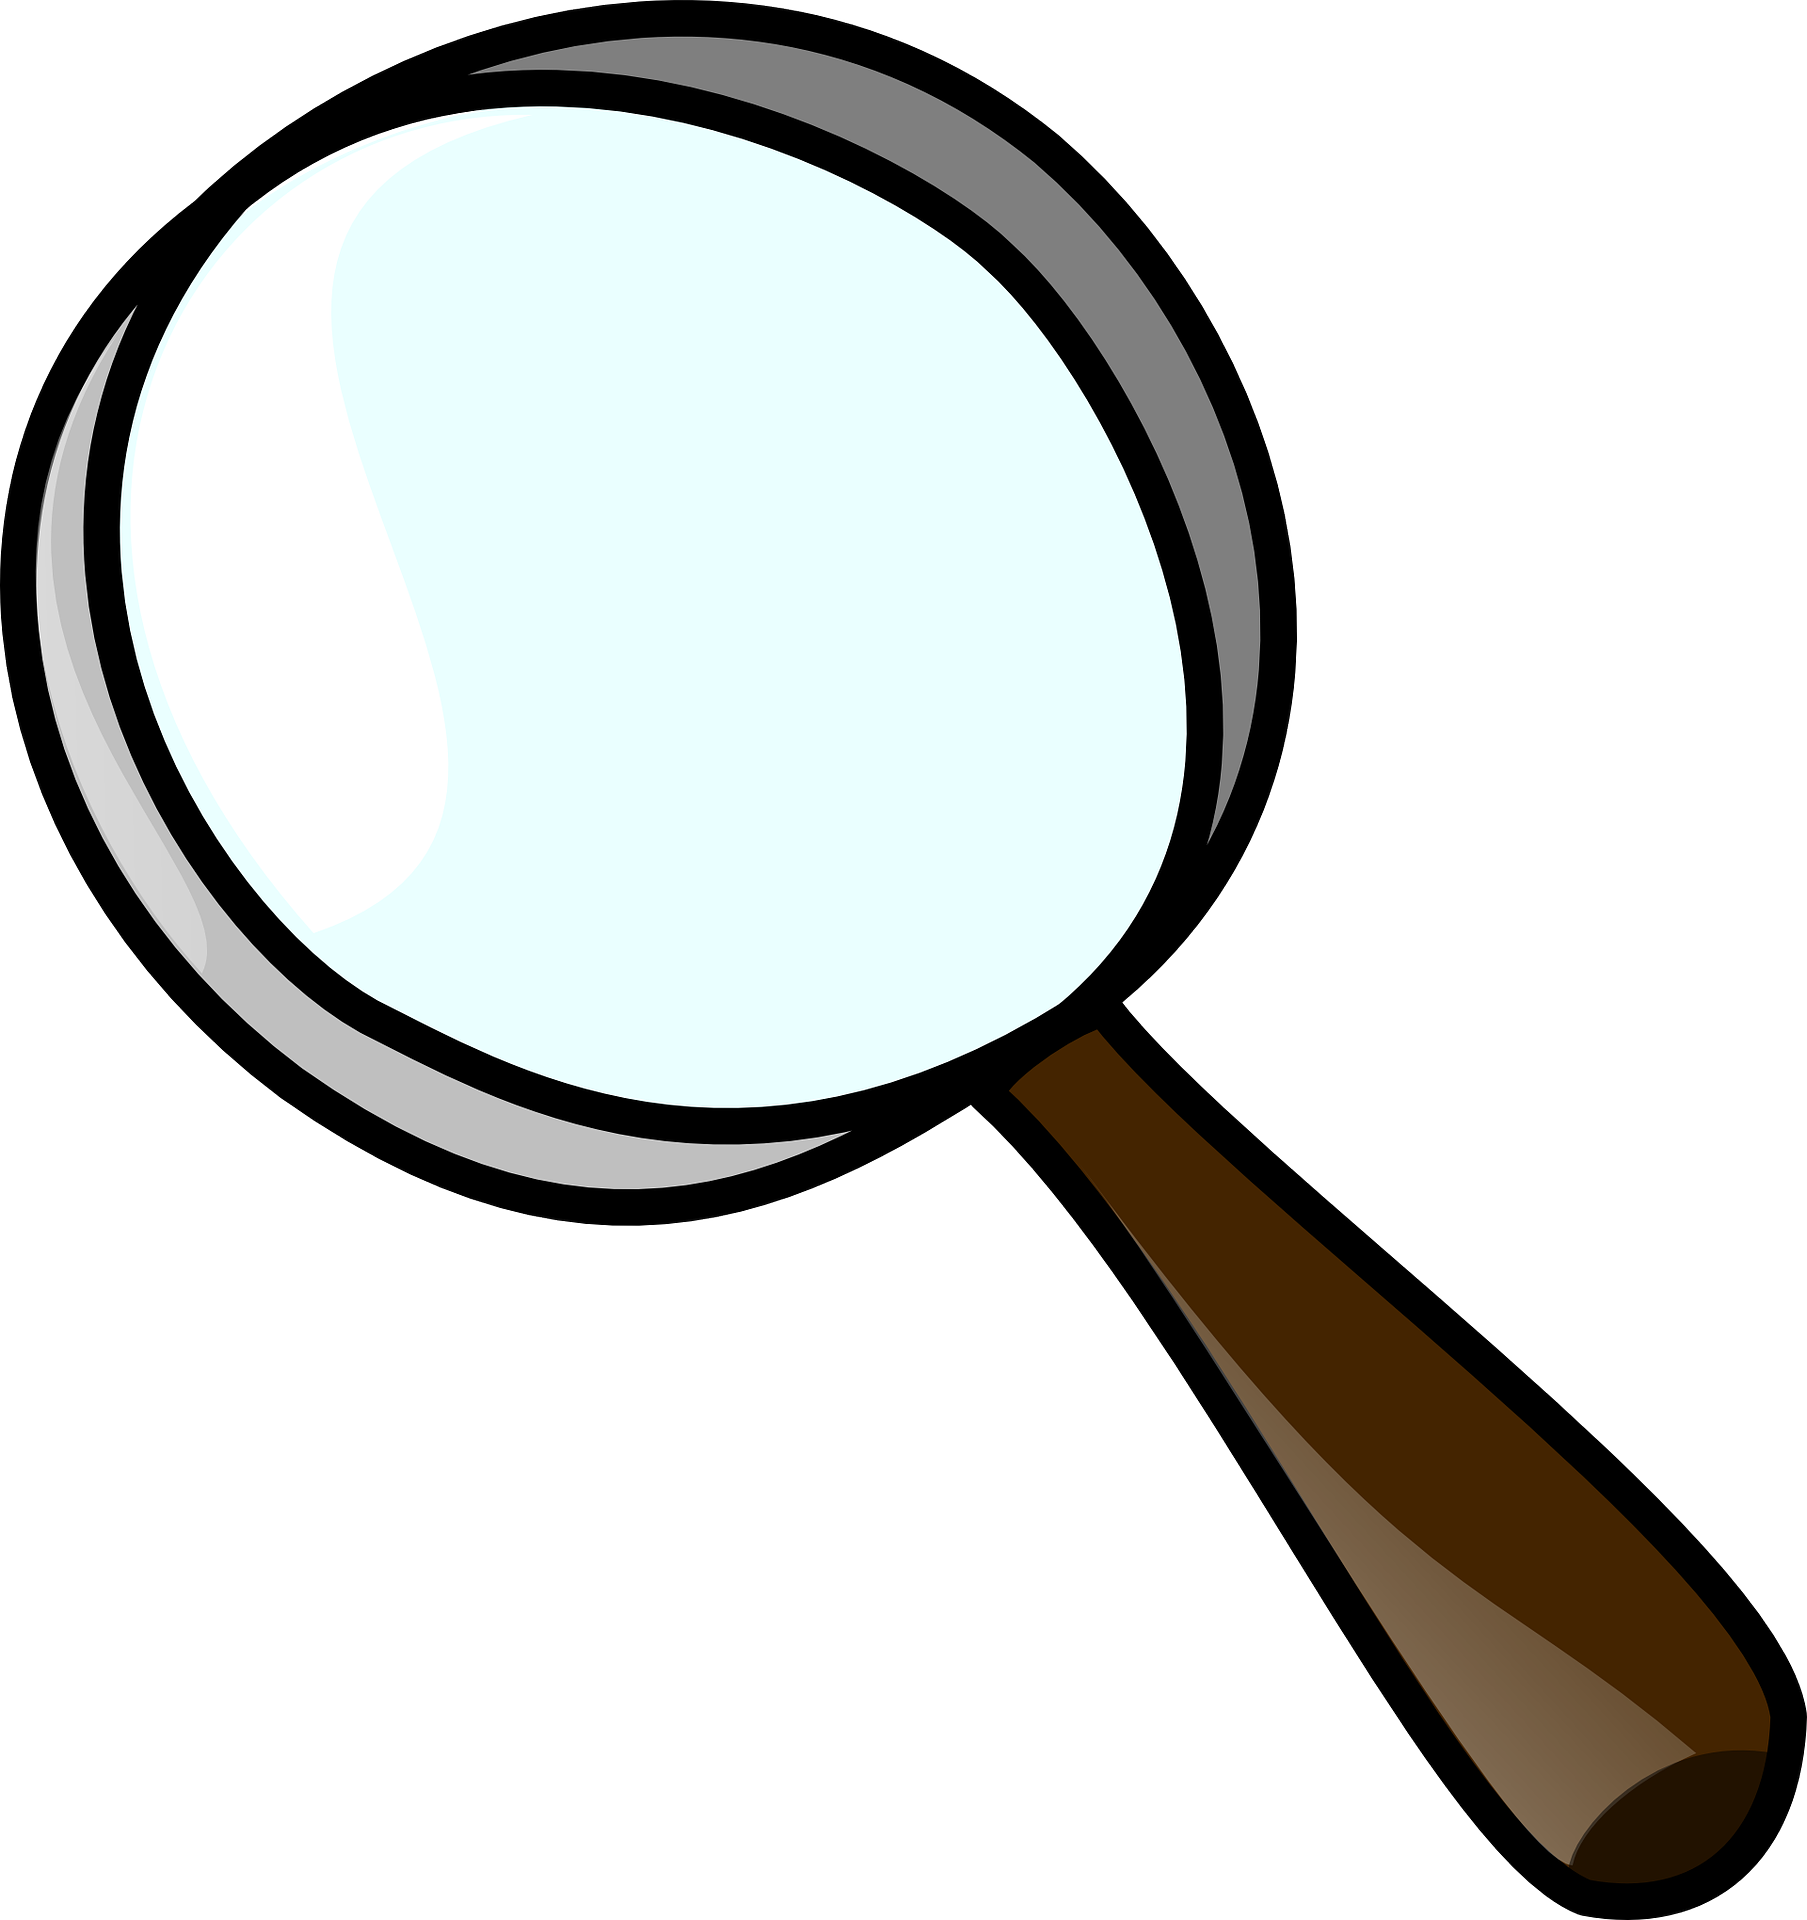 detective-clipart-magnifying-lens-detective-magnifying-lens